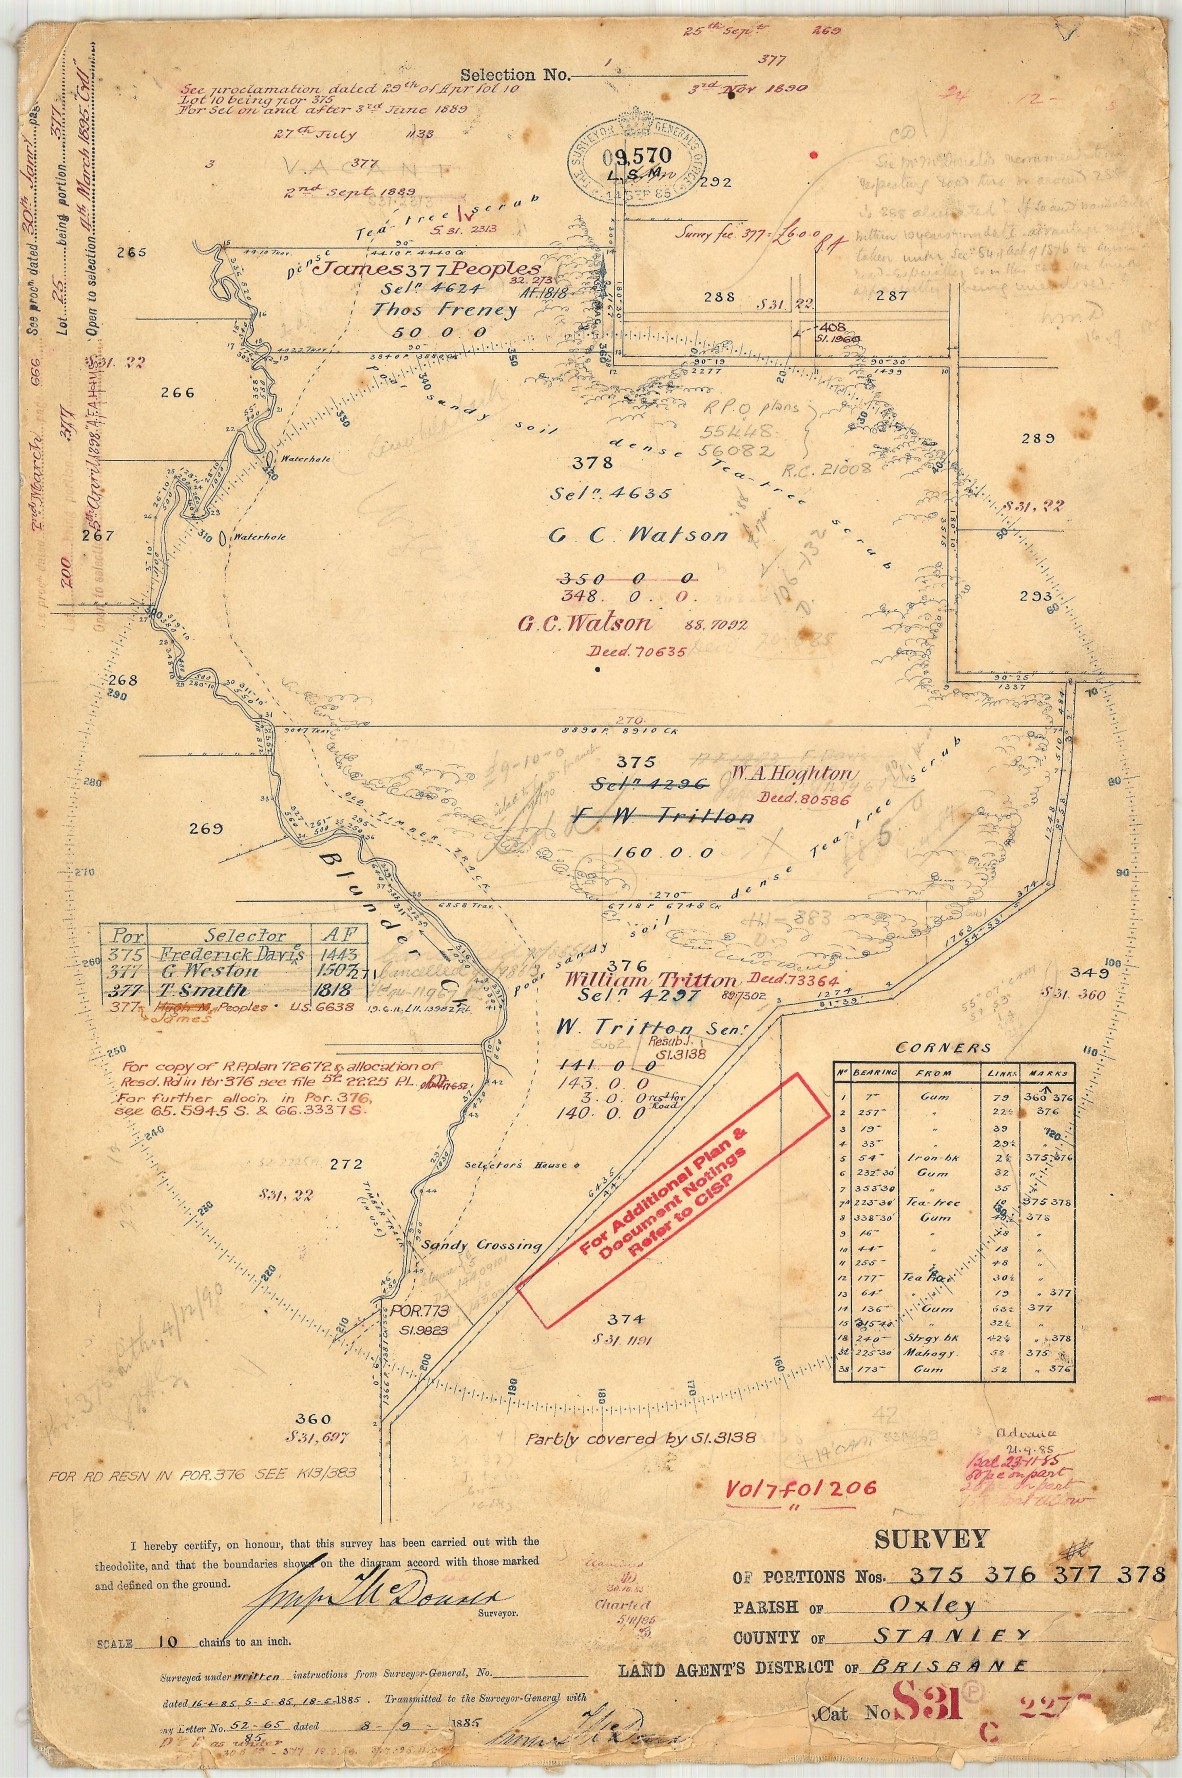 Part of Survey Plan S312275 showing Fred and William Tritton’s selections on what is now Ritchie Road, Pallara.